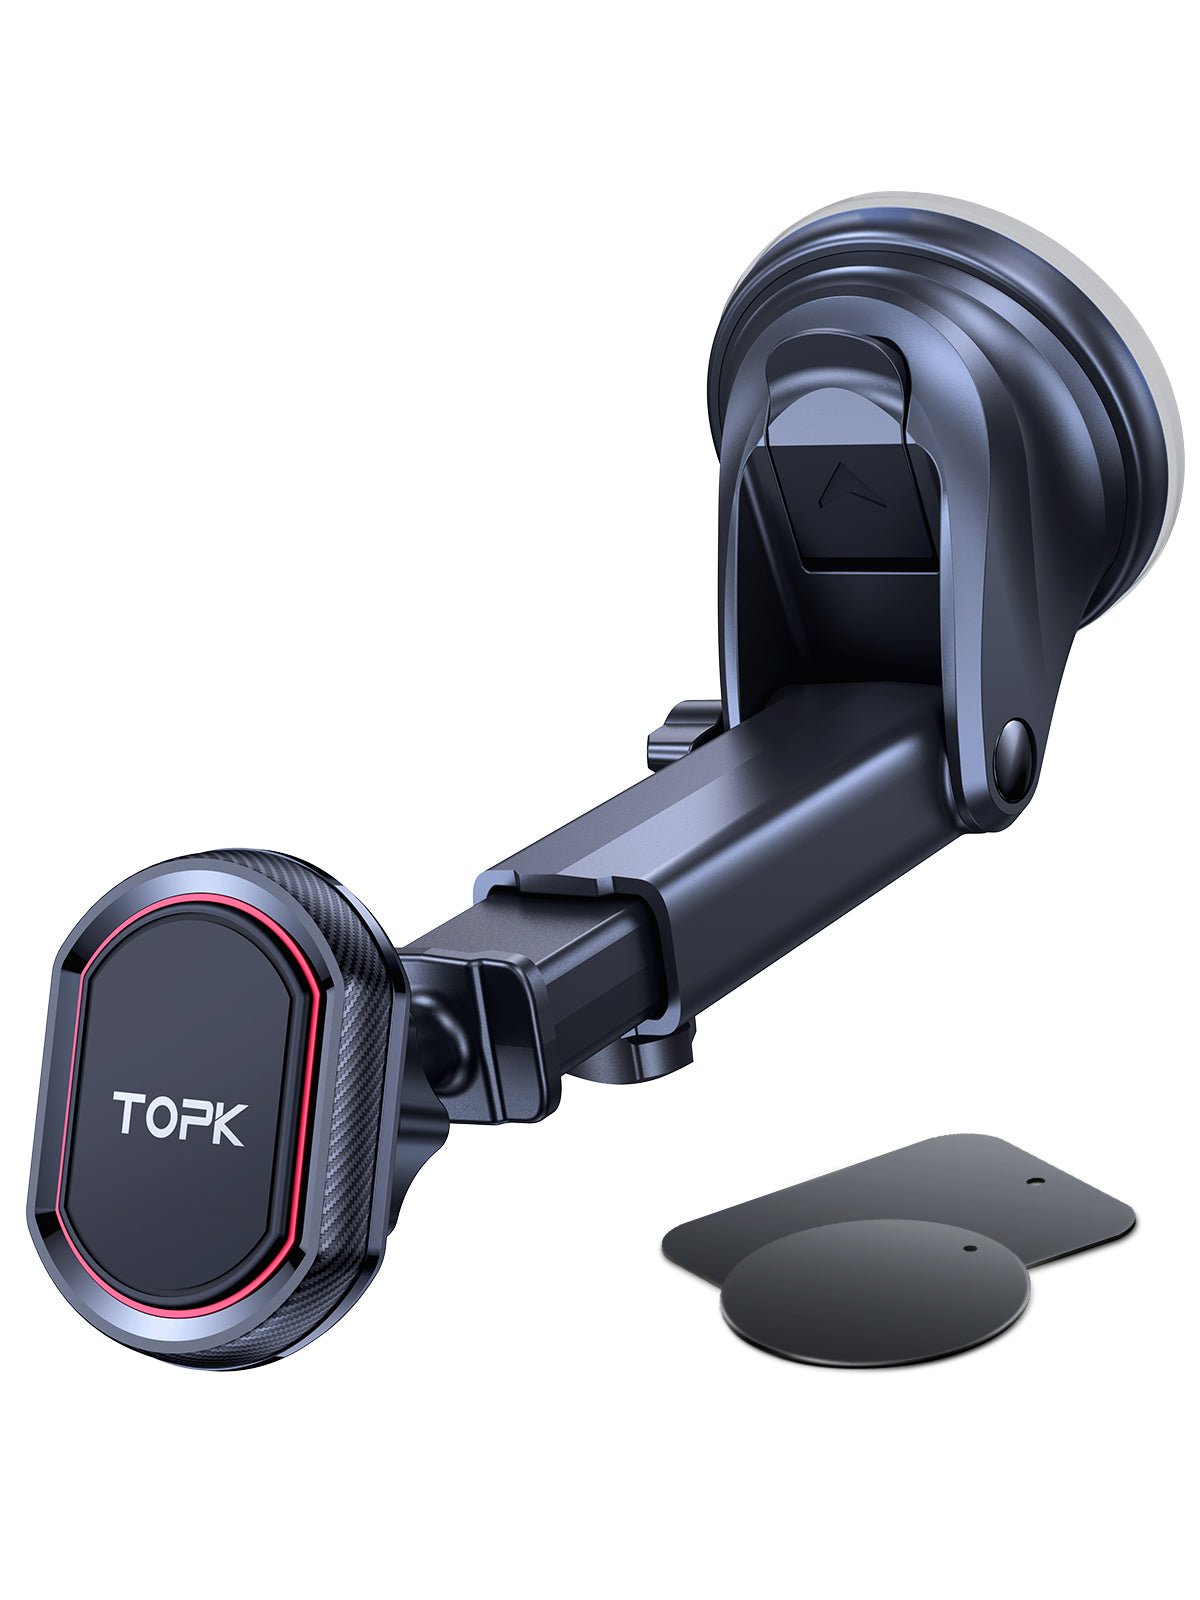 TOPK D37X Magnetic Phone Mount For Car Dashboard and Windshield - TOPK Official Store